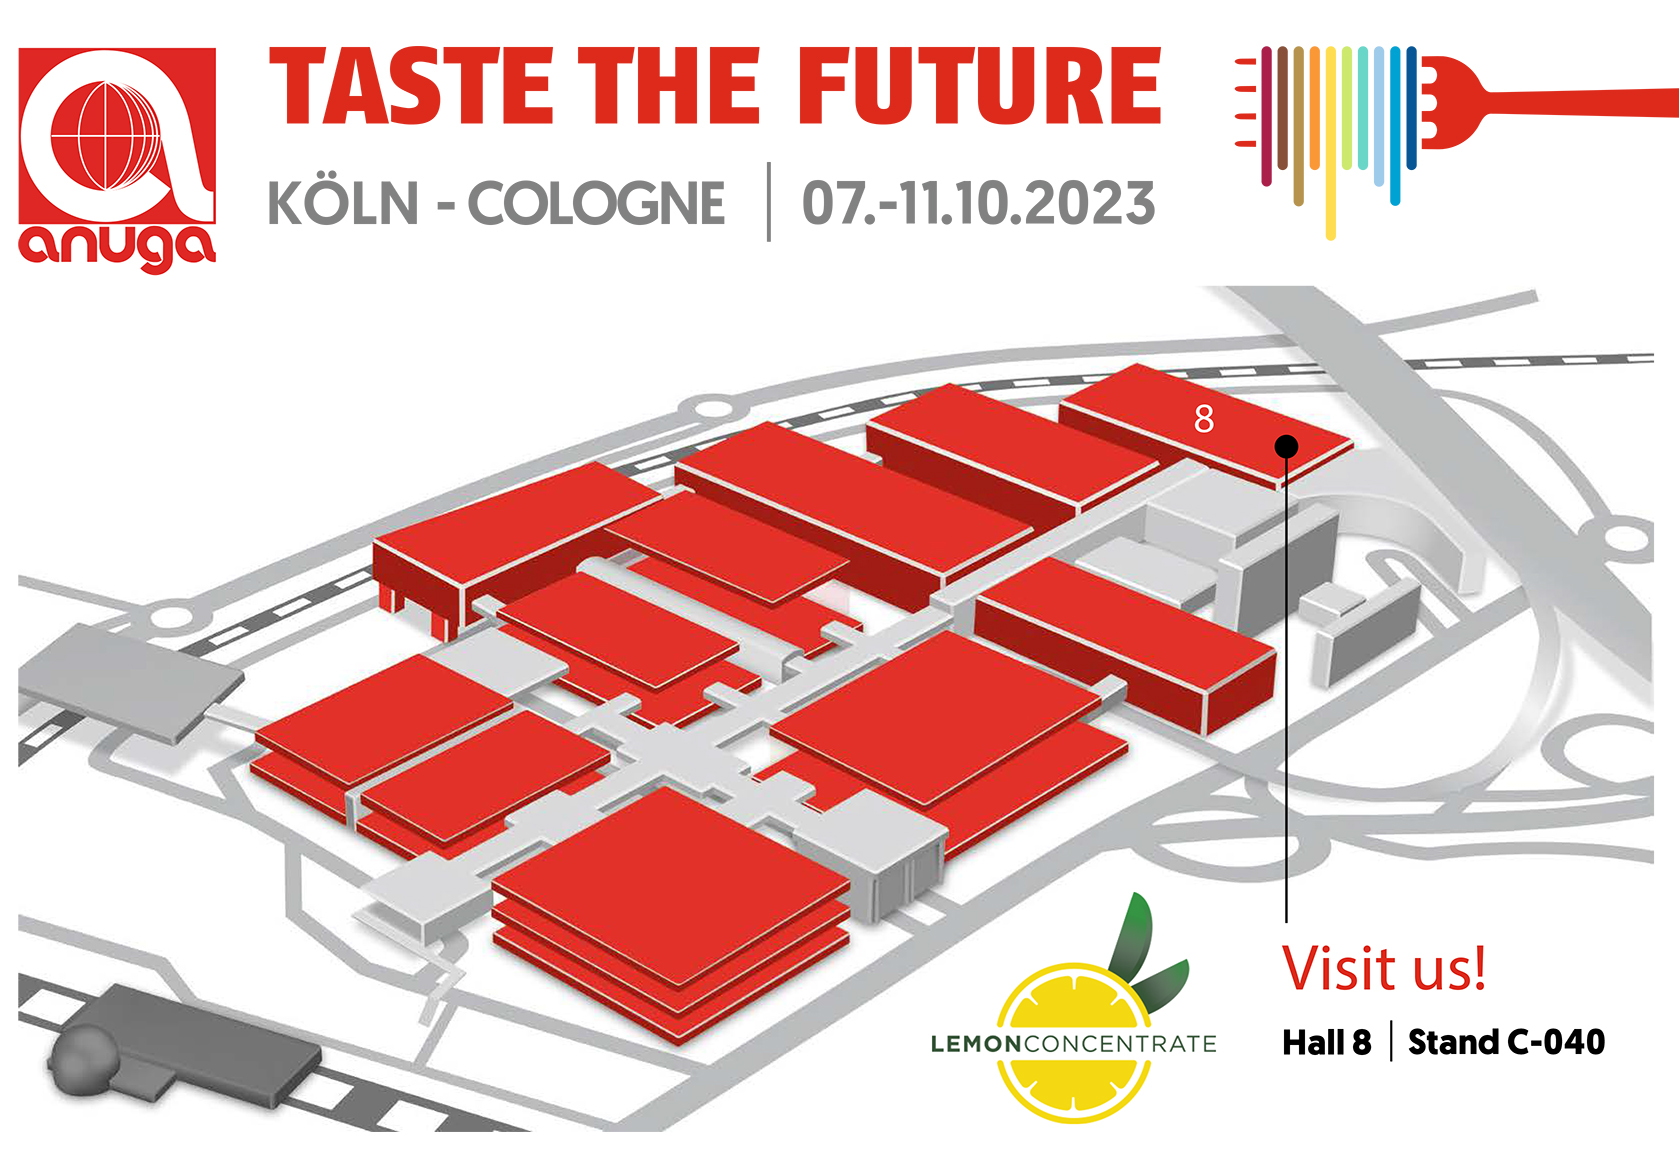 ANUGA 2023 - The leading food and beverage fair in Germany-image- 2